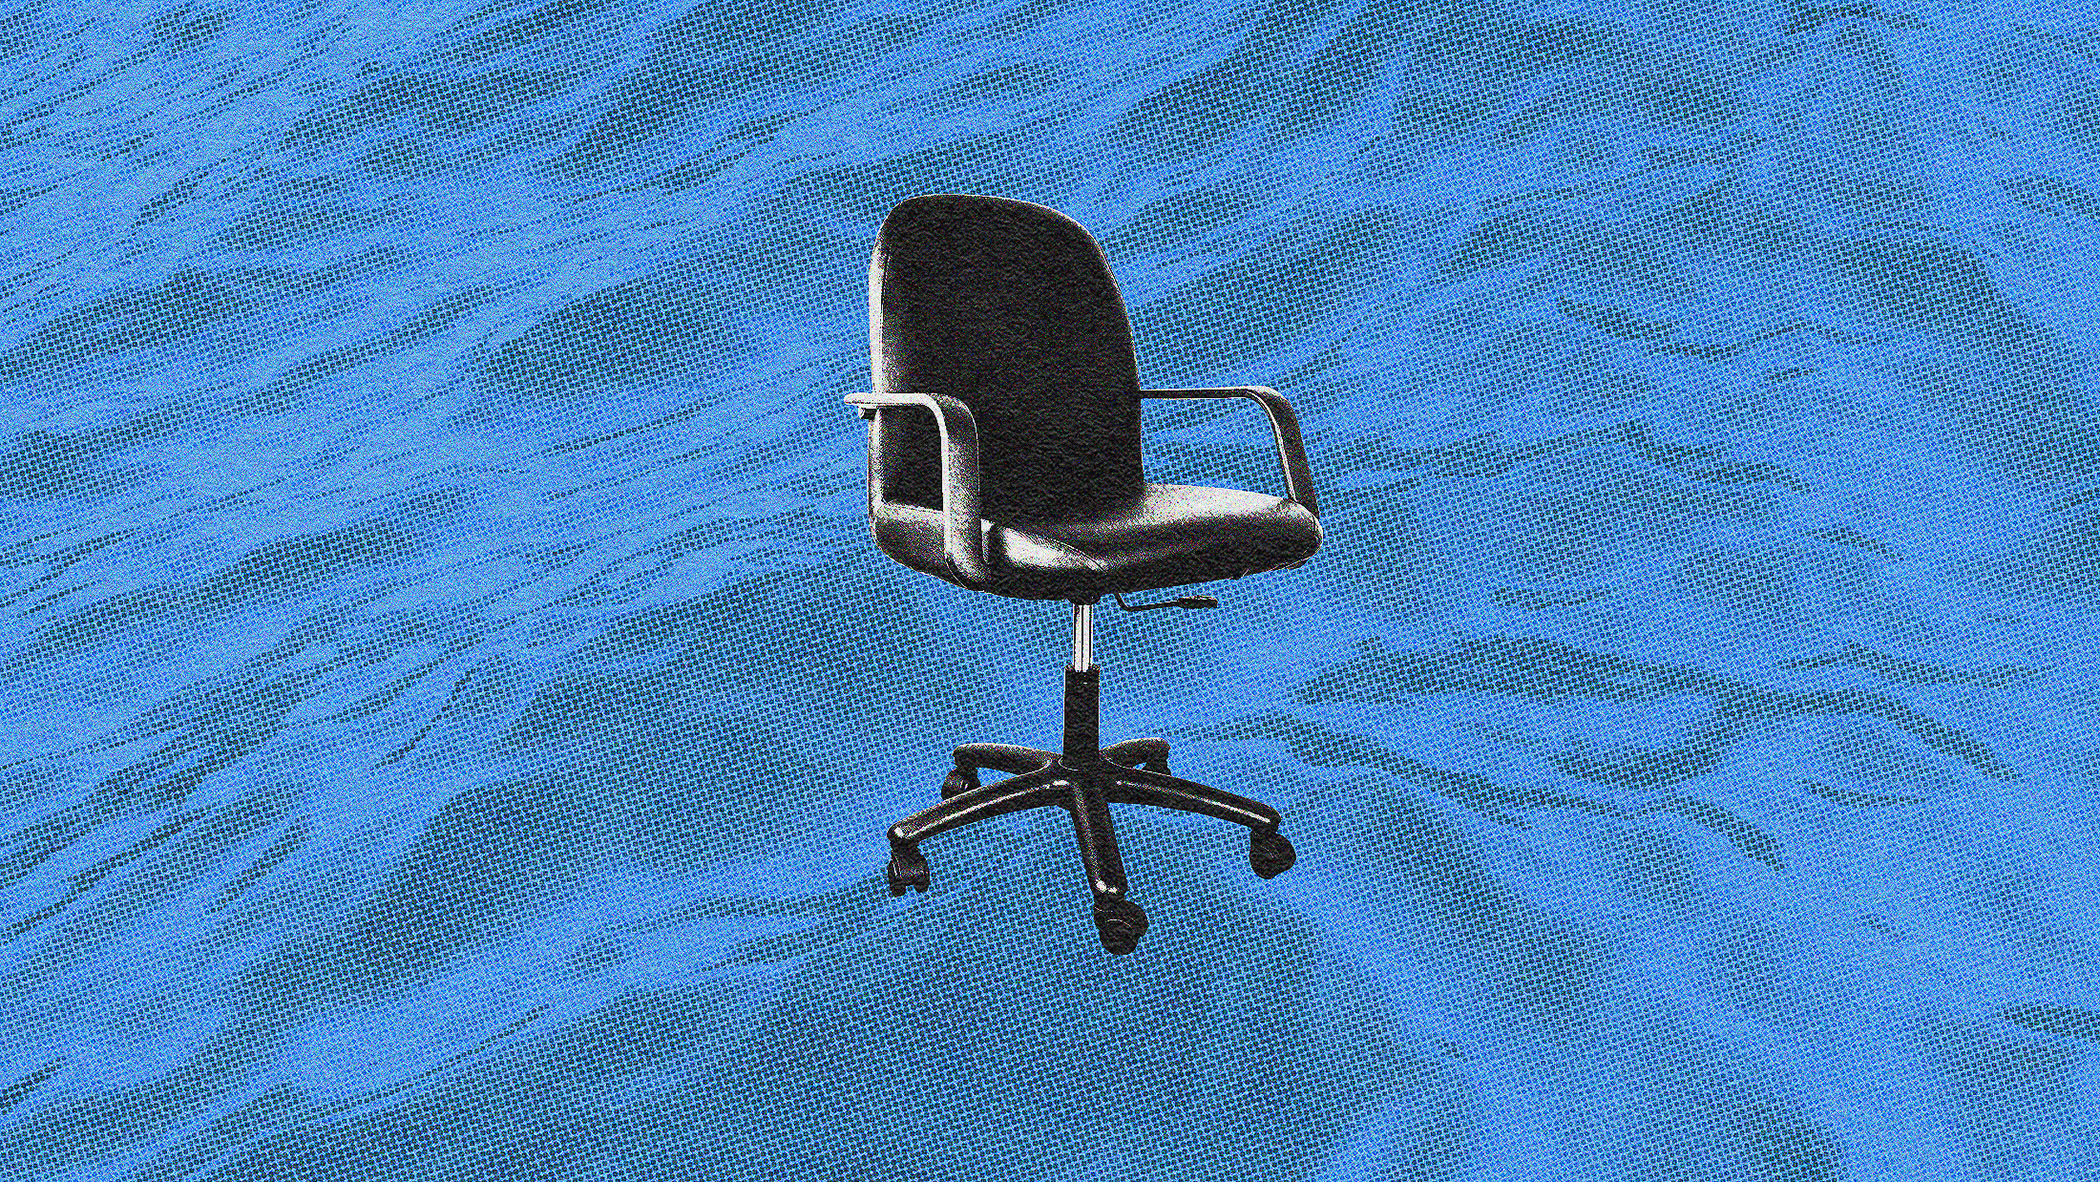 An office chair, symbolizing leadership through volatility, placed on a textured blue background.